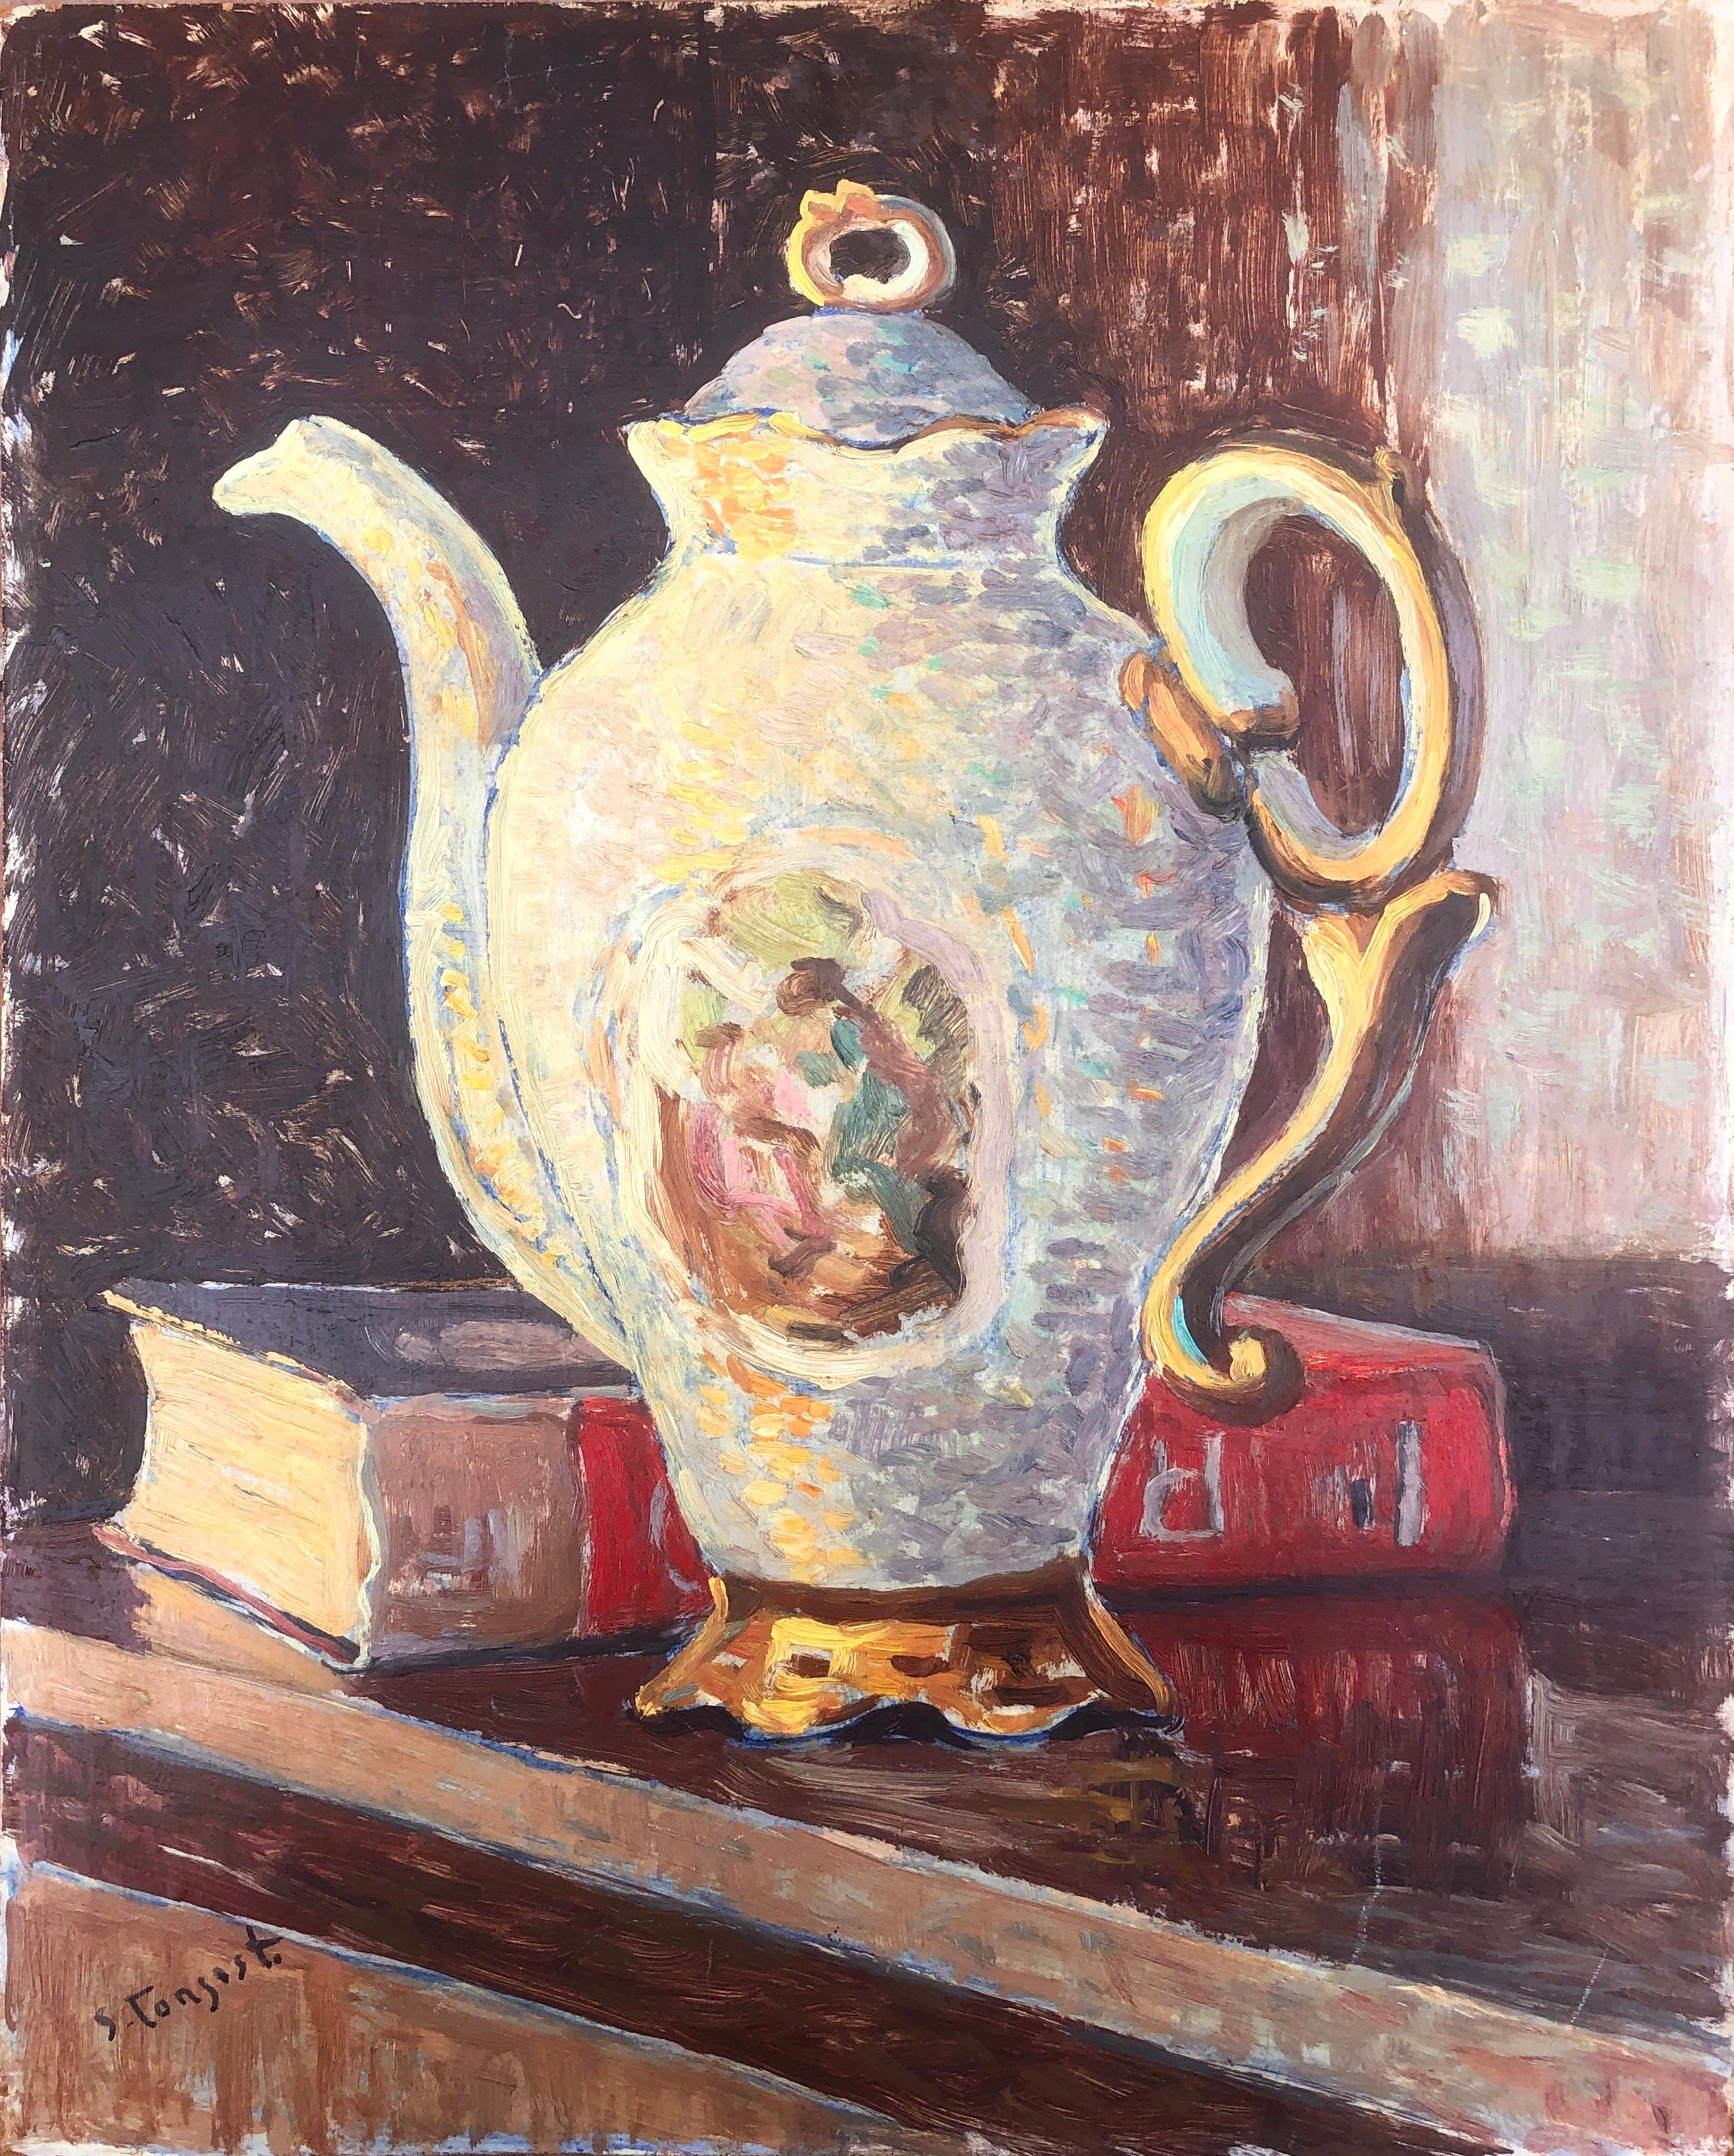 Sebastia Congost i Pla Interior Painting - still life with teapot and book oil on board painting